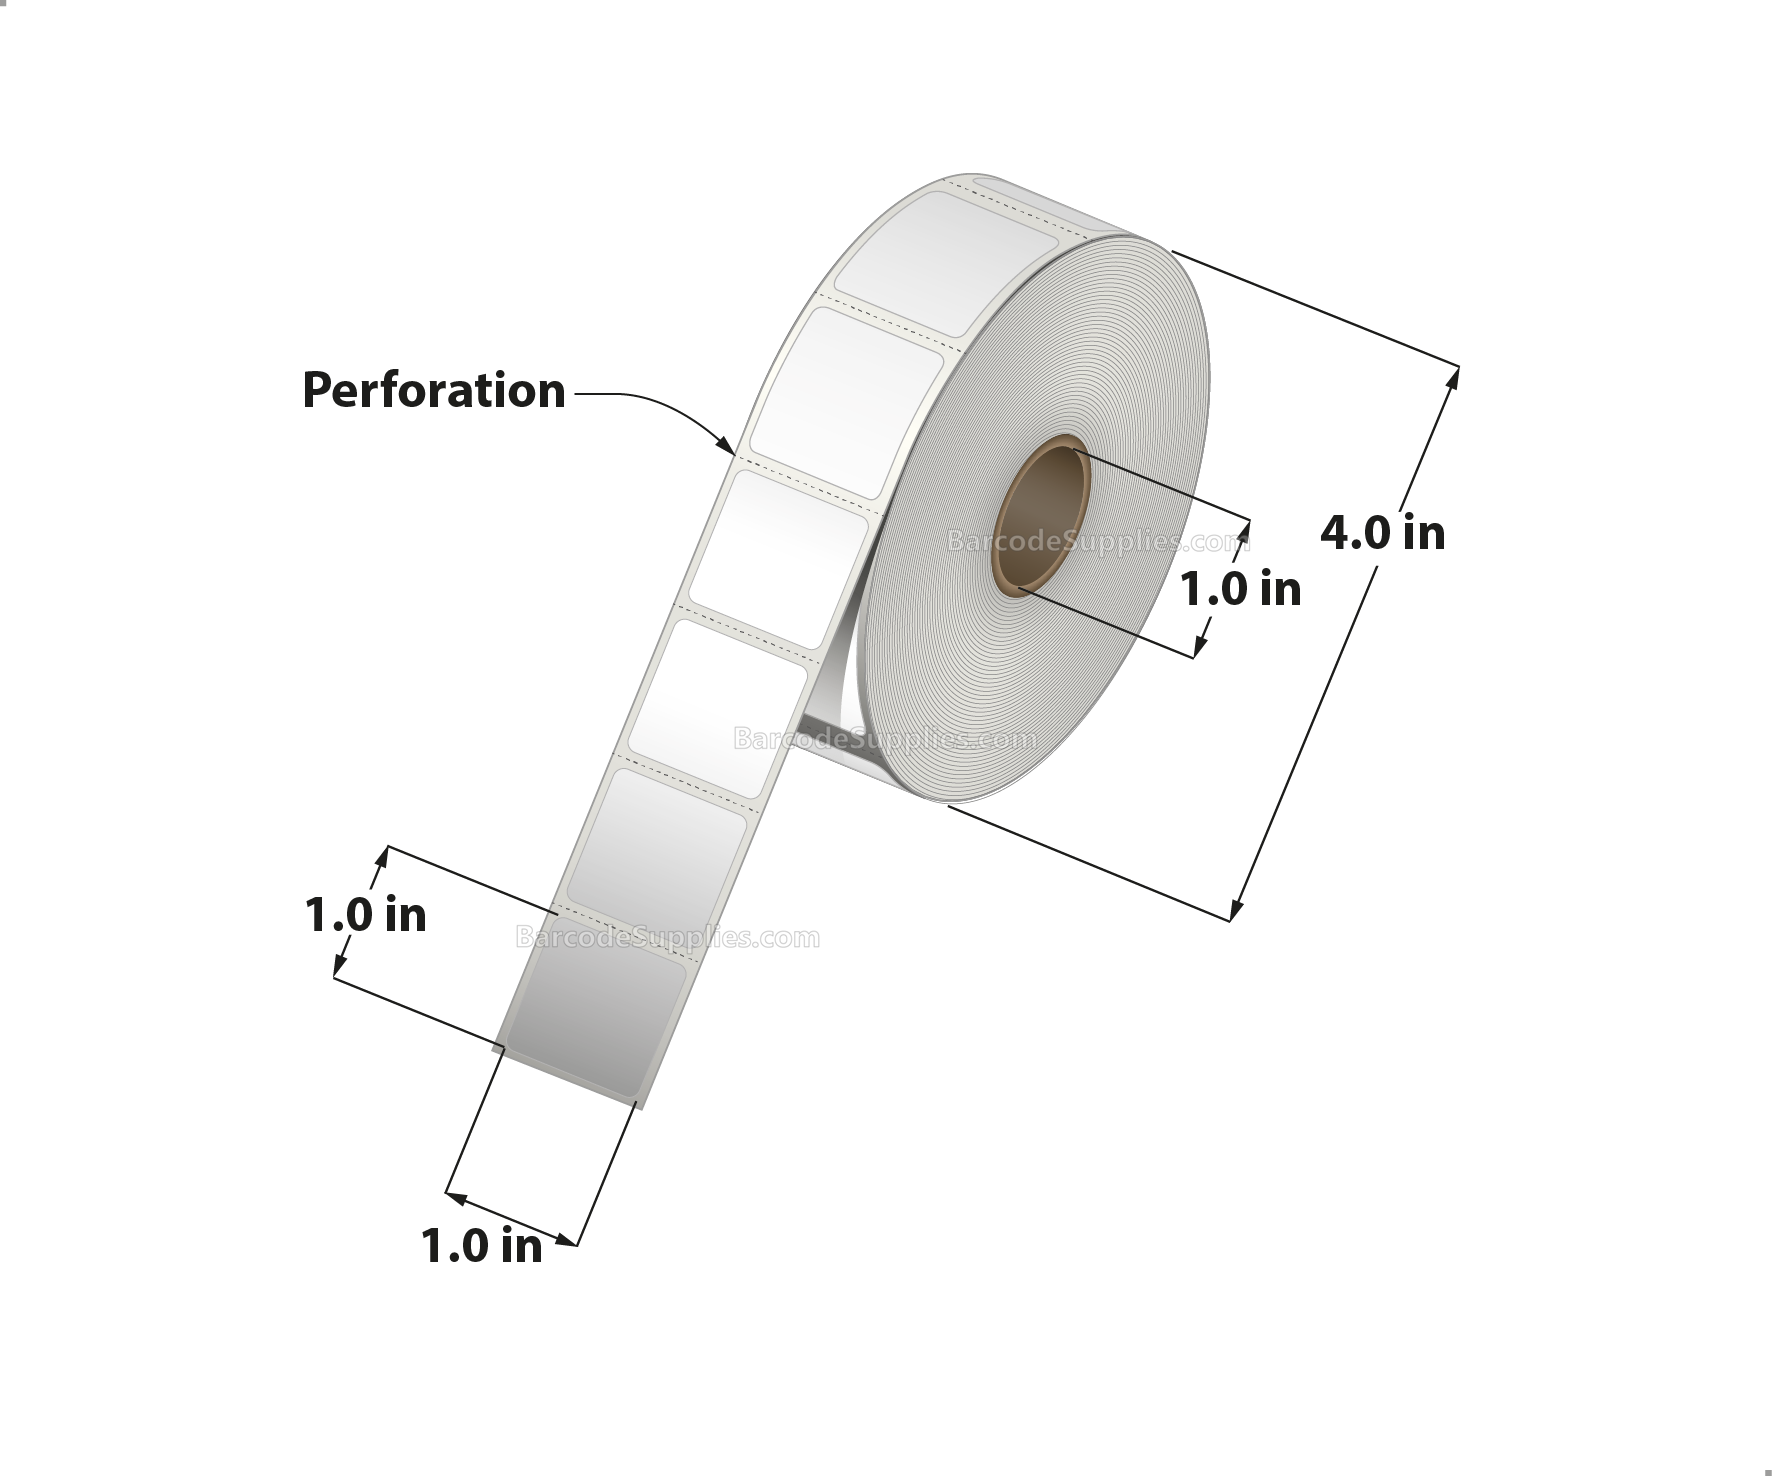 1 x 1 Thermal Transfer White Labels With Permanent Acrylic Adhesive - Perforated - 1310 Labels Per Roll - Carton Of 4 Rolls - 5240 Labels Total - MPN: TH151-14PTT